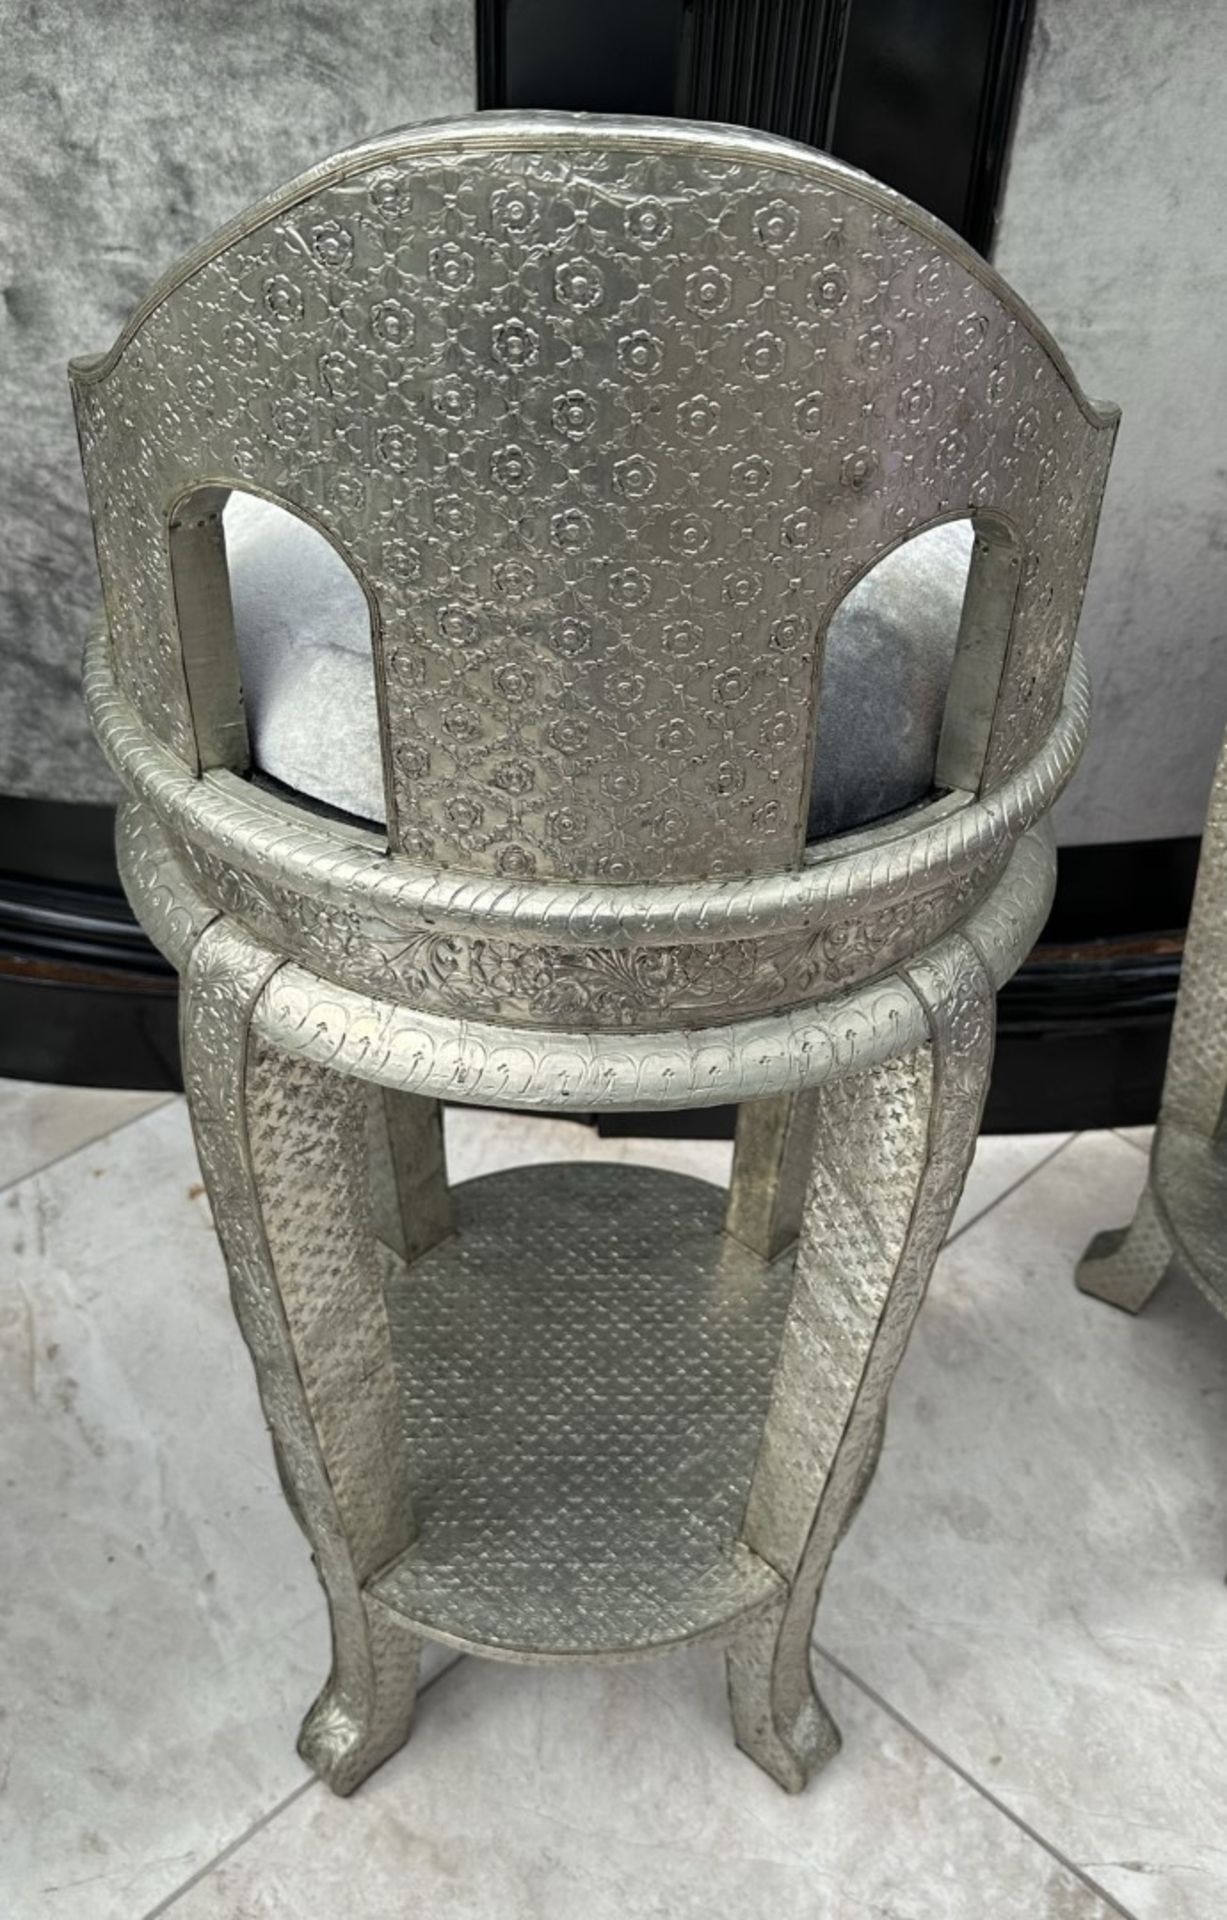 6 x Ornate Silver Tone Bar Stools With Grey Velvet Seat Pads - Image 7 of 16